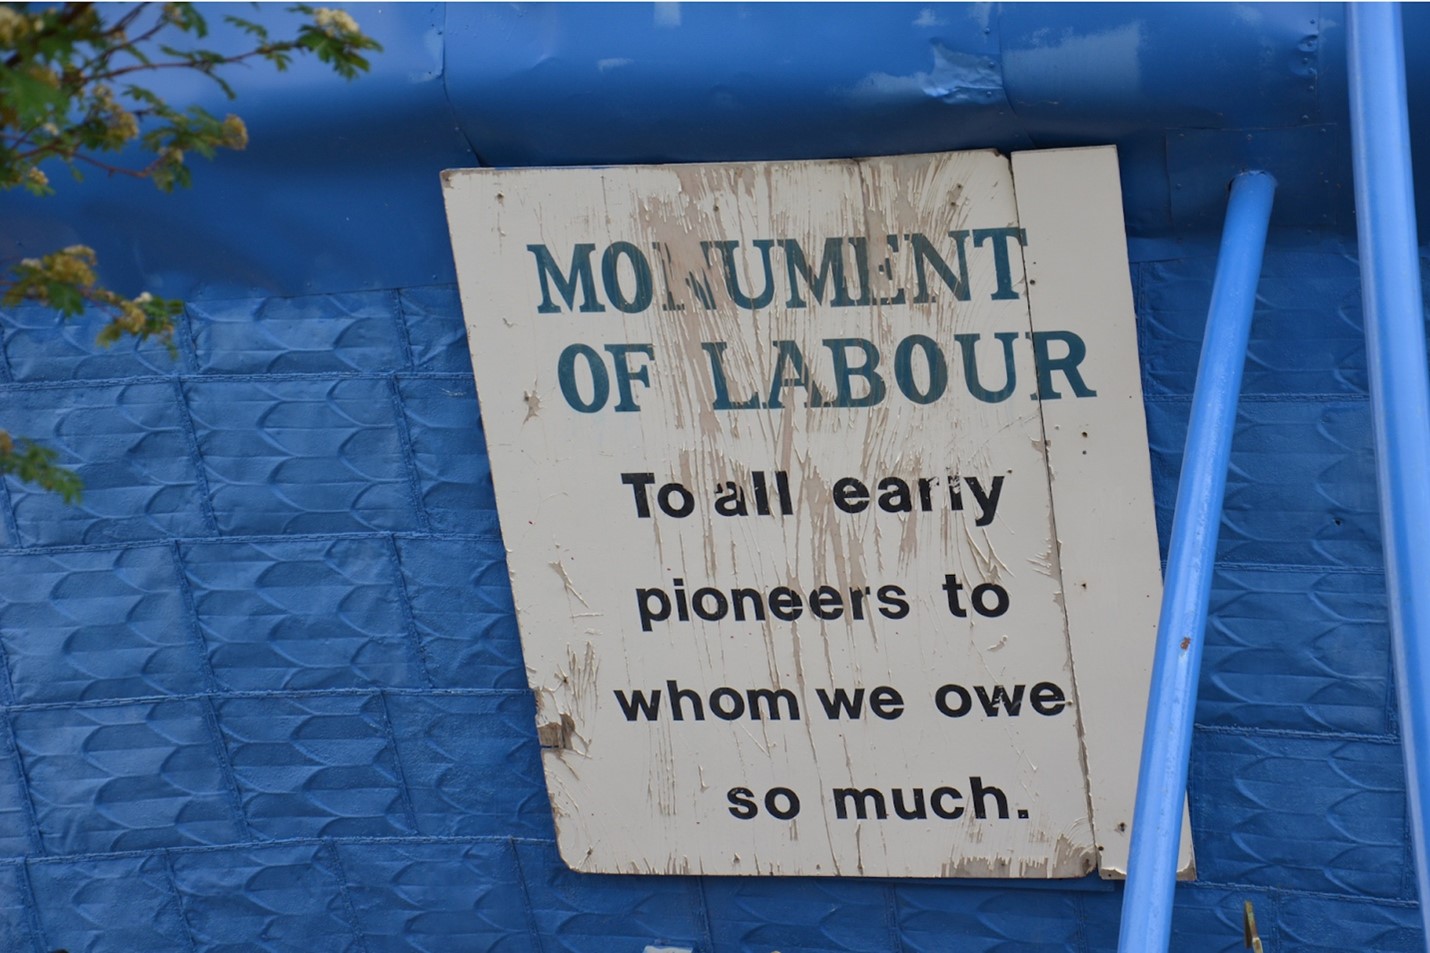 Pictured is a photo of a sign attached to the side of the Sukanen Ship Pioneer Museum. The background is the royal blue of the ship, and the photo includes one of the matching blue metal support poles. The sign is white although the wood it is made of is weathered and partially showing through, and it reads 'MONUMENT OF LABOUR. To all early pioneers to whom we owe so much.' The text in all caps is dark blue and the rest is black. In the upper left corner of the image, a tree branch is intruding into the frame.